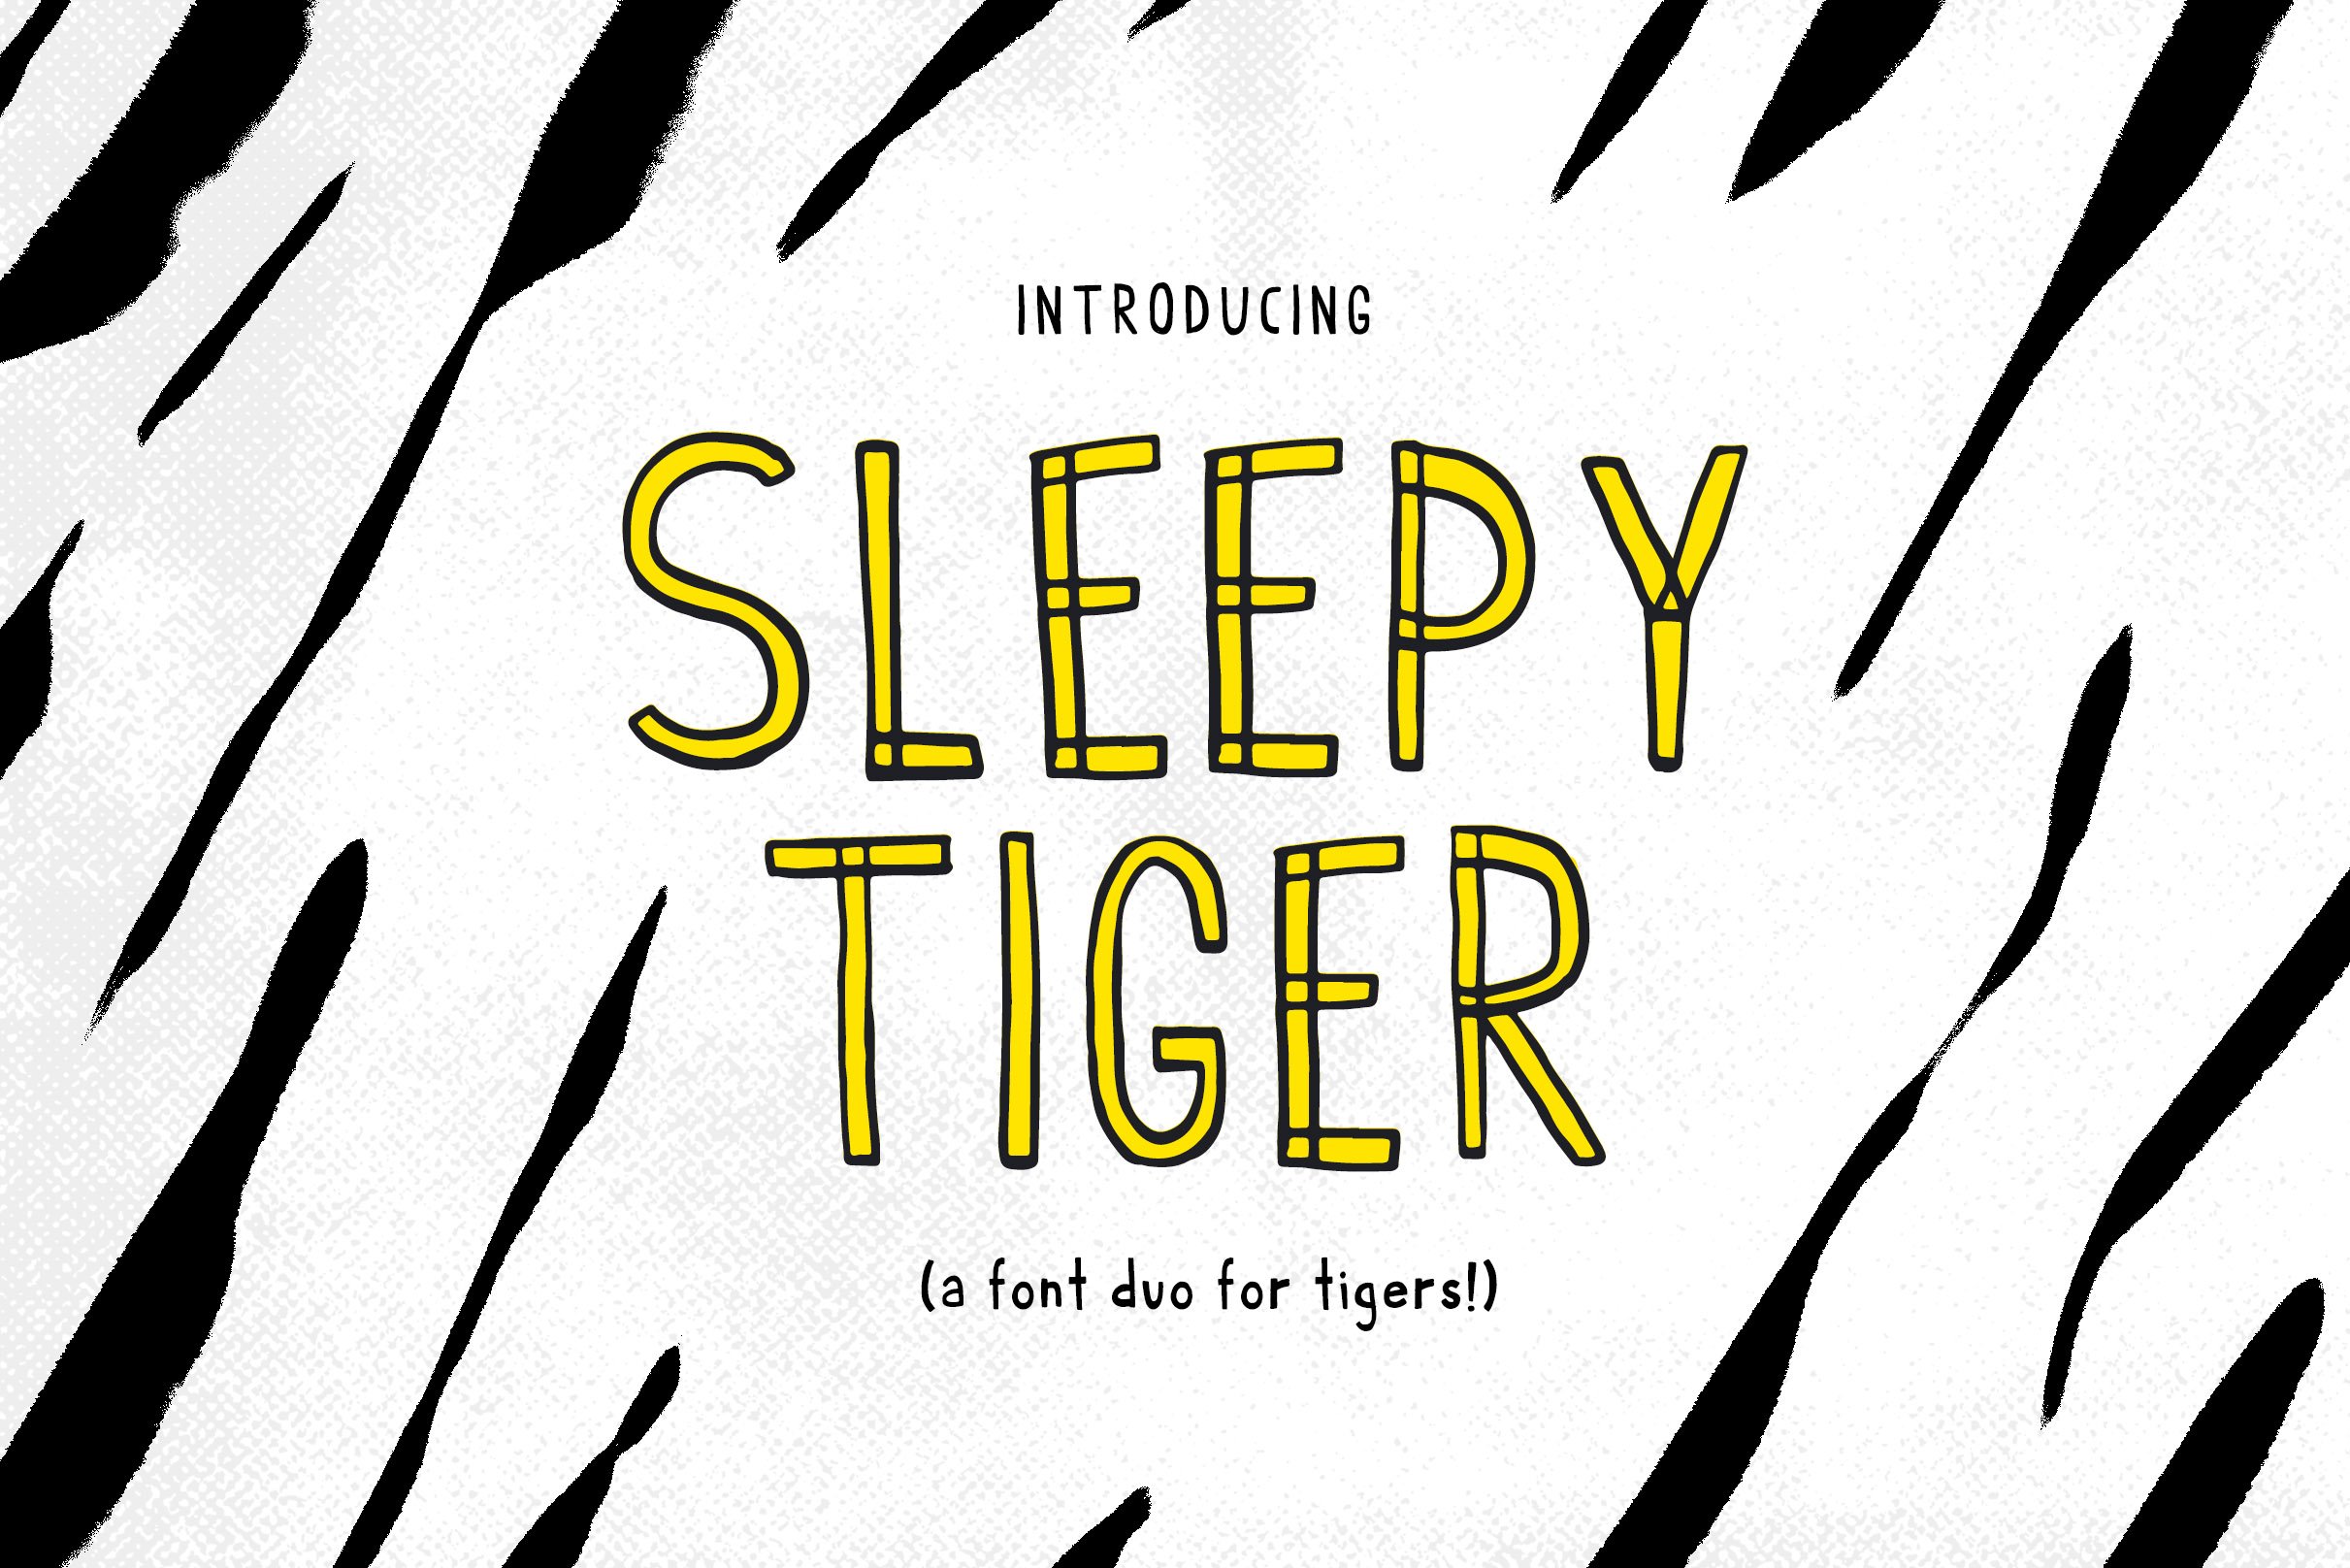 Sleepy Tiger - Font Duo cover image.